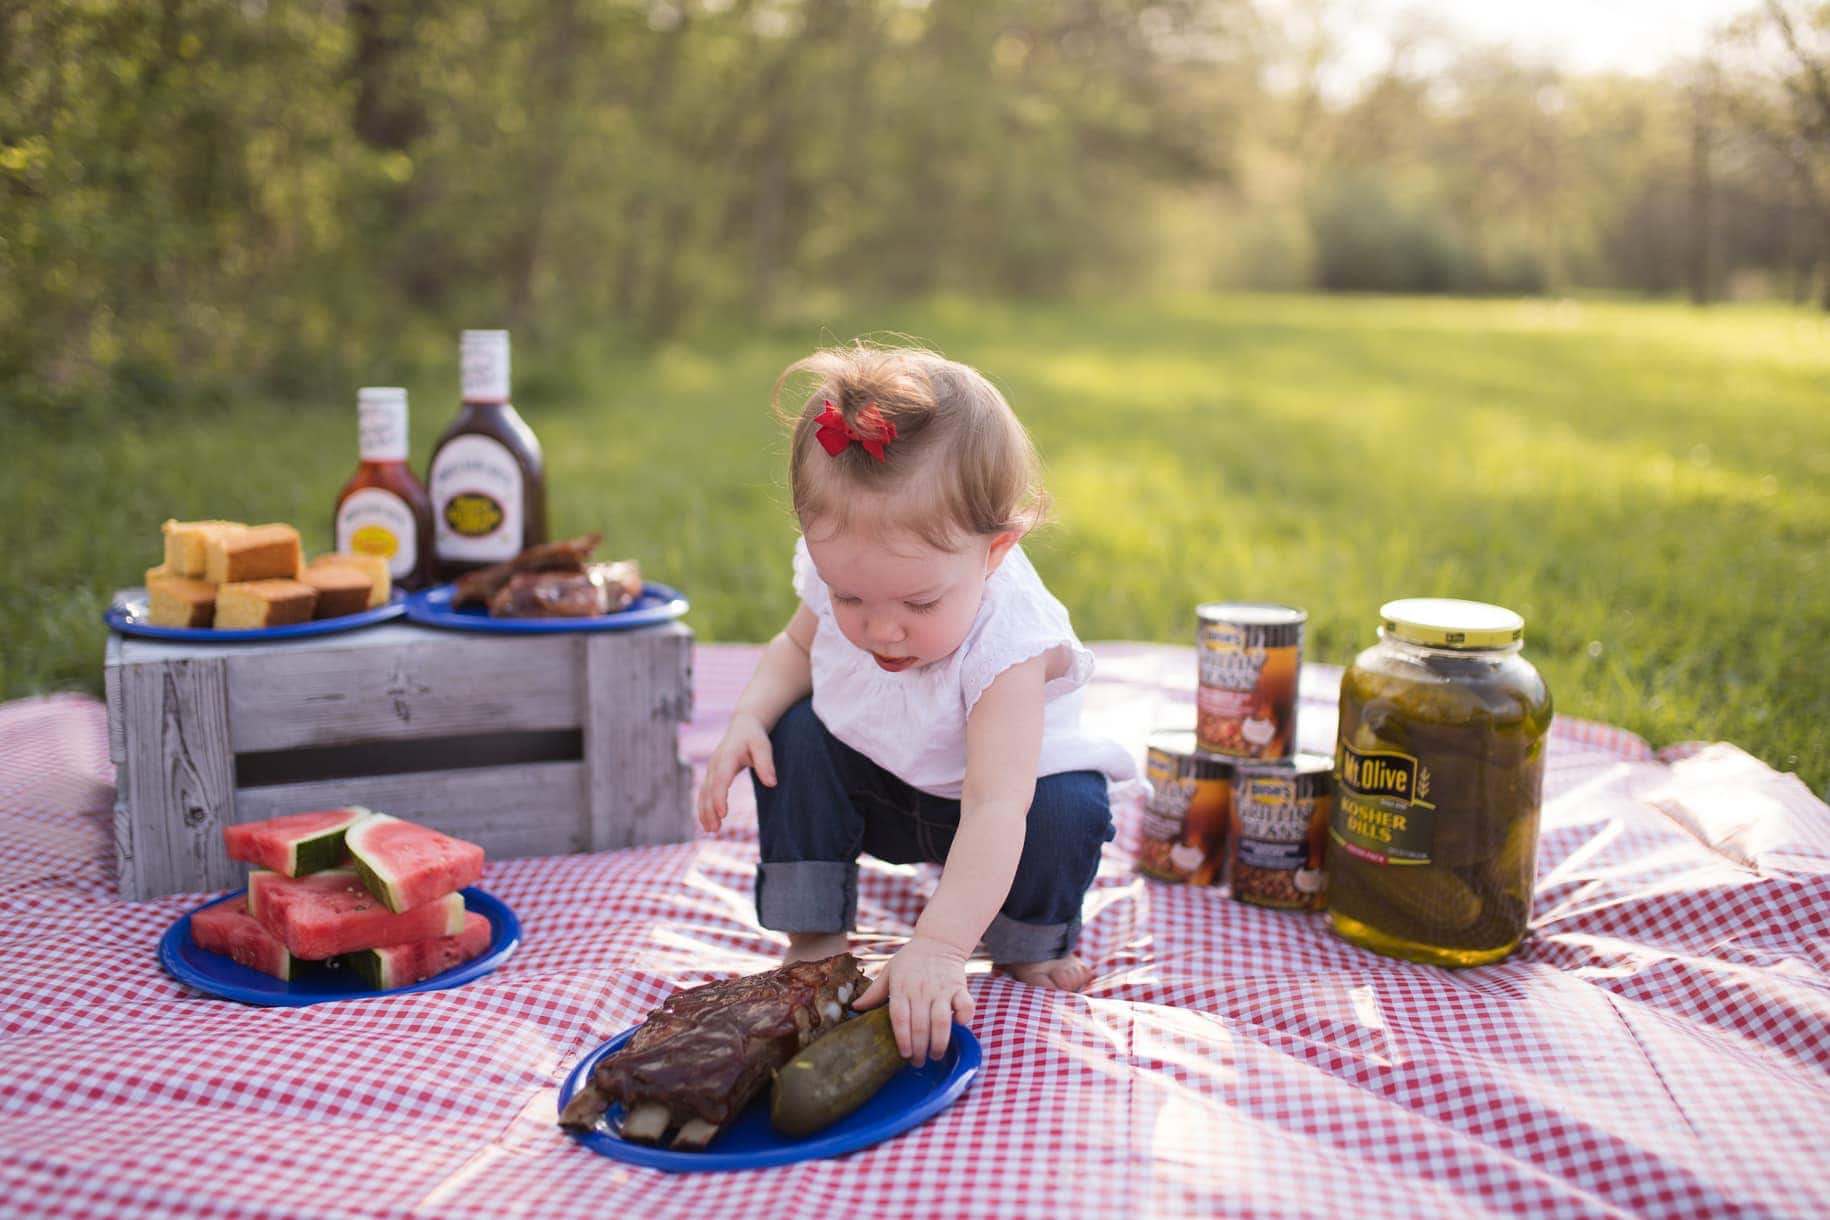 baby with BBQ picnic on a picnic blanket in the grass. baby reaches for pickle on plate